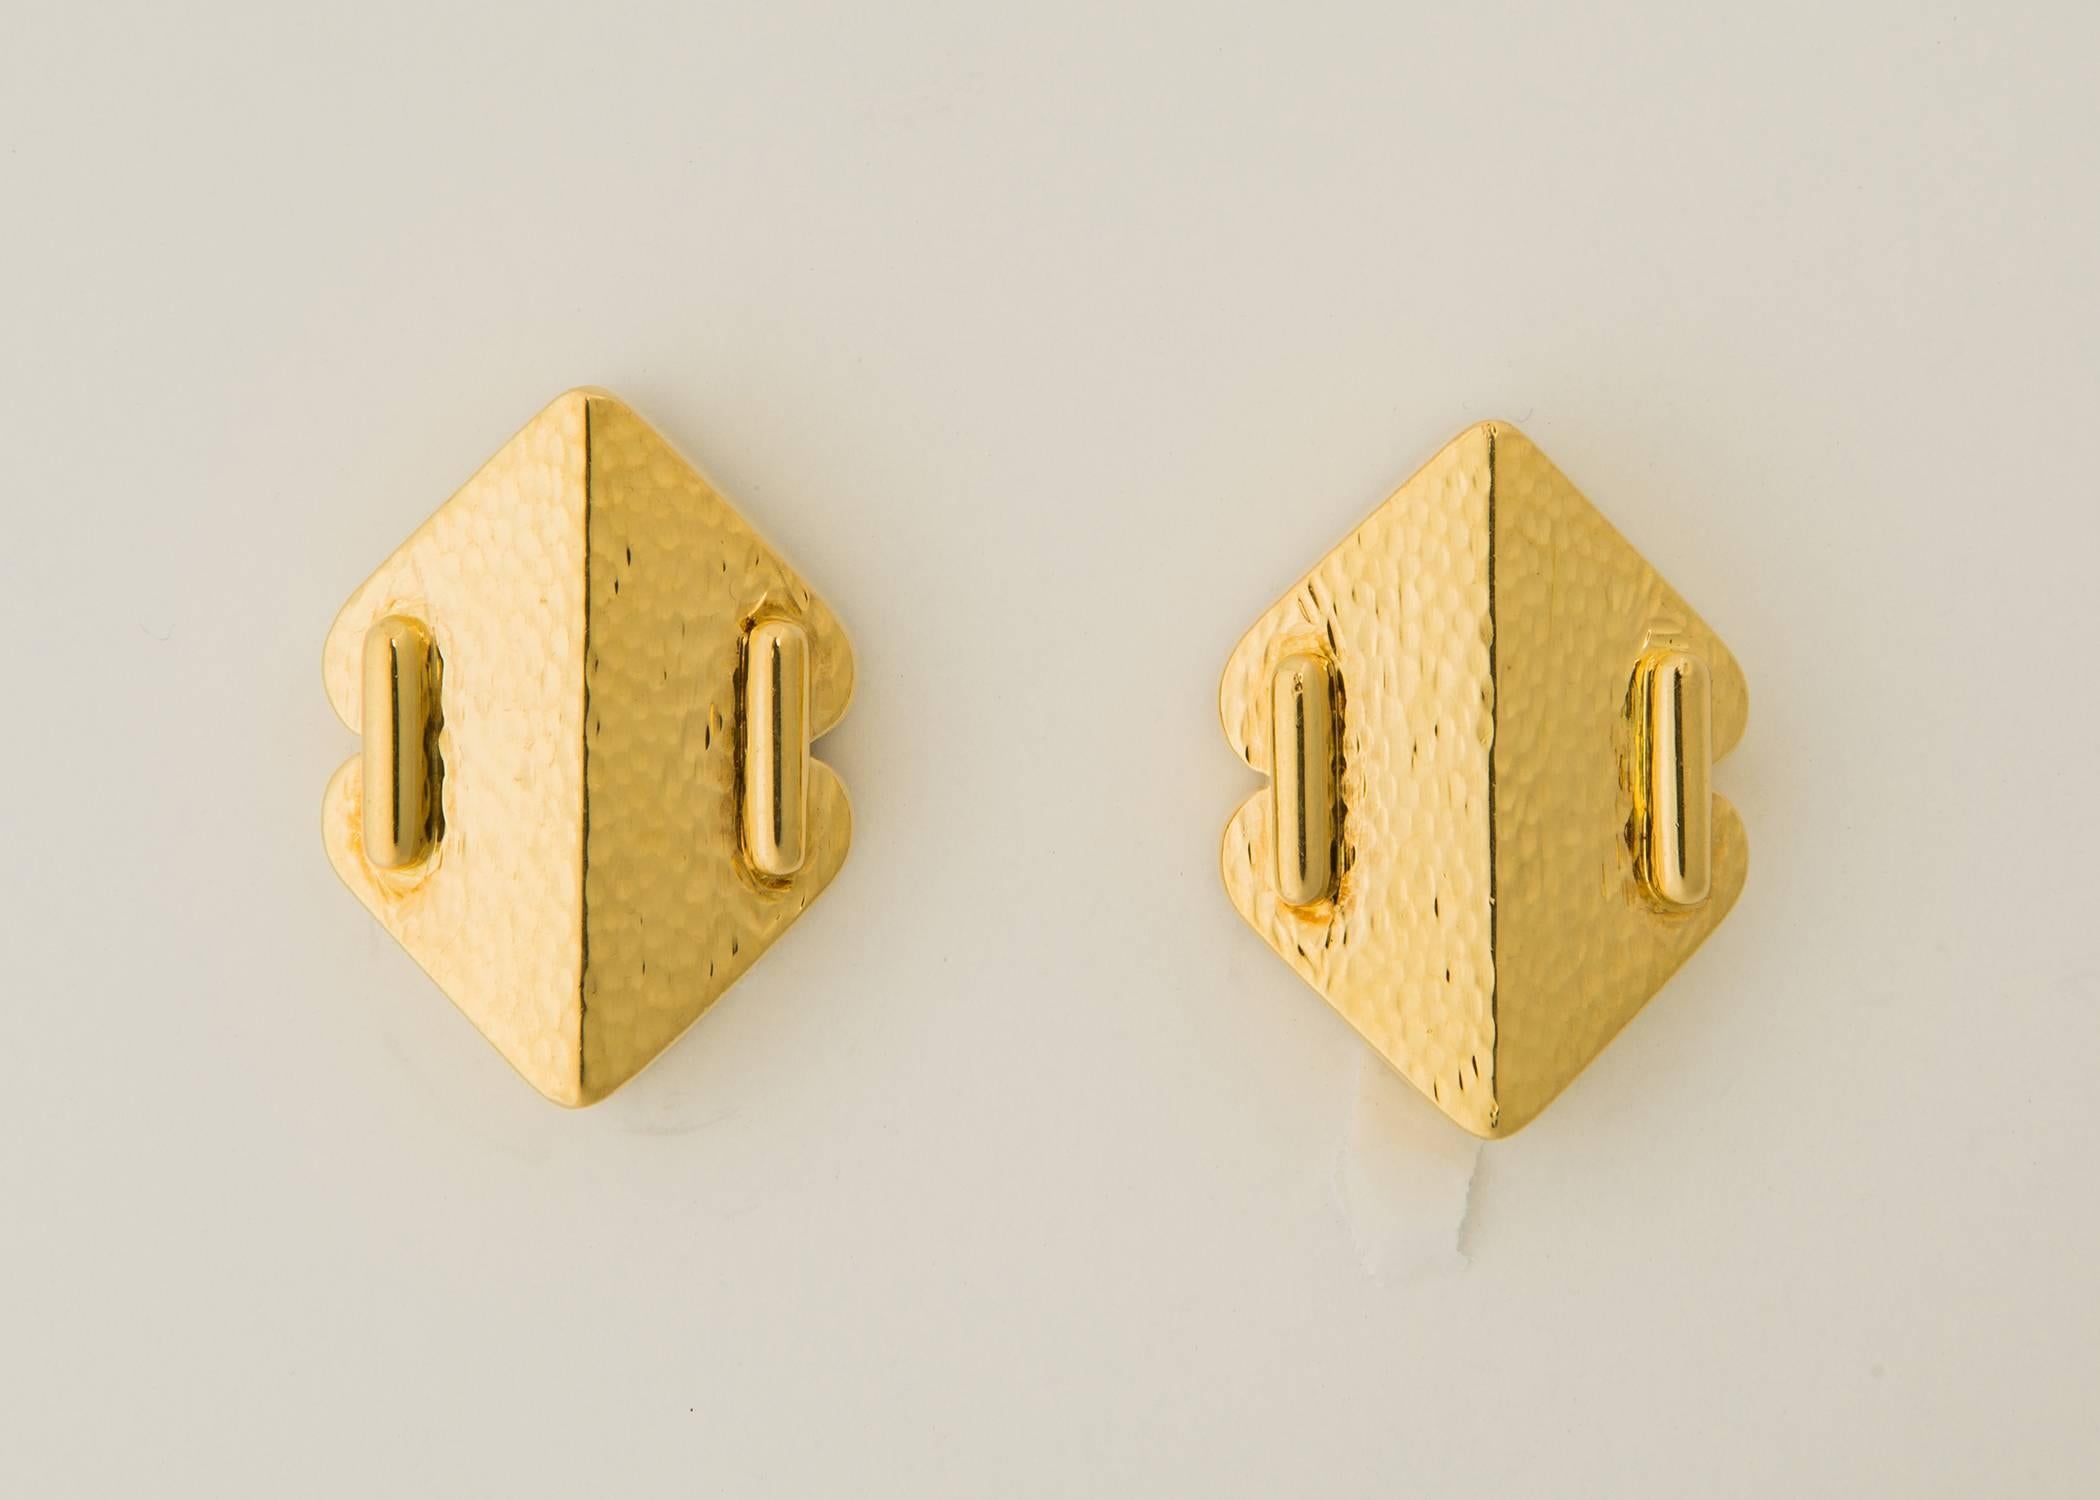 Andrew Clunn's long time association with David Webb shows through in this pair of classic geometric earrings. beautifully detailed with a pebble finish. 1 1/4 inches in size. 